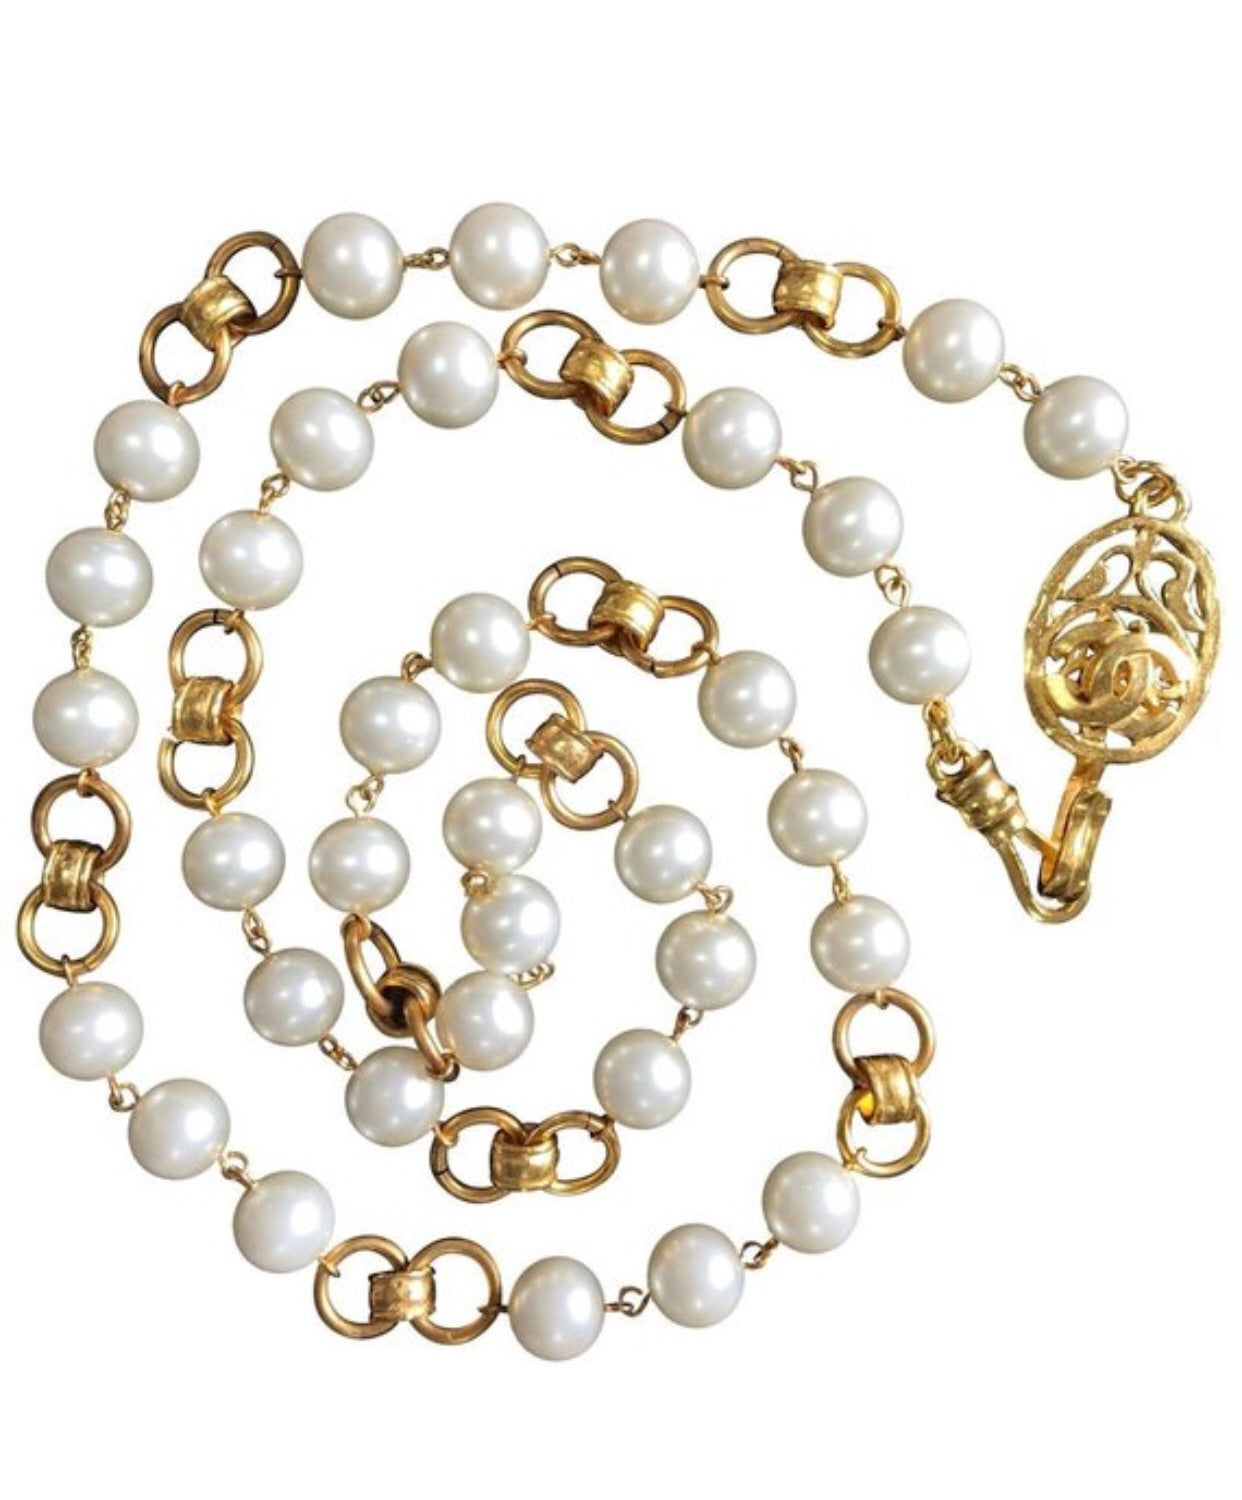 Chanel Vintage Faux Pearl And Gold Chain Necklace